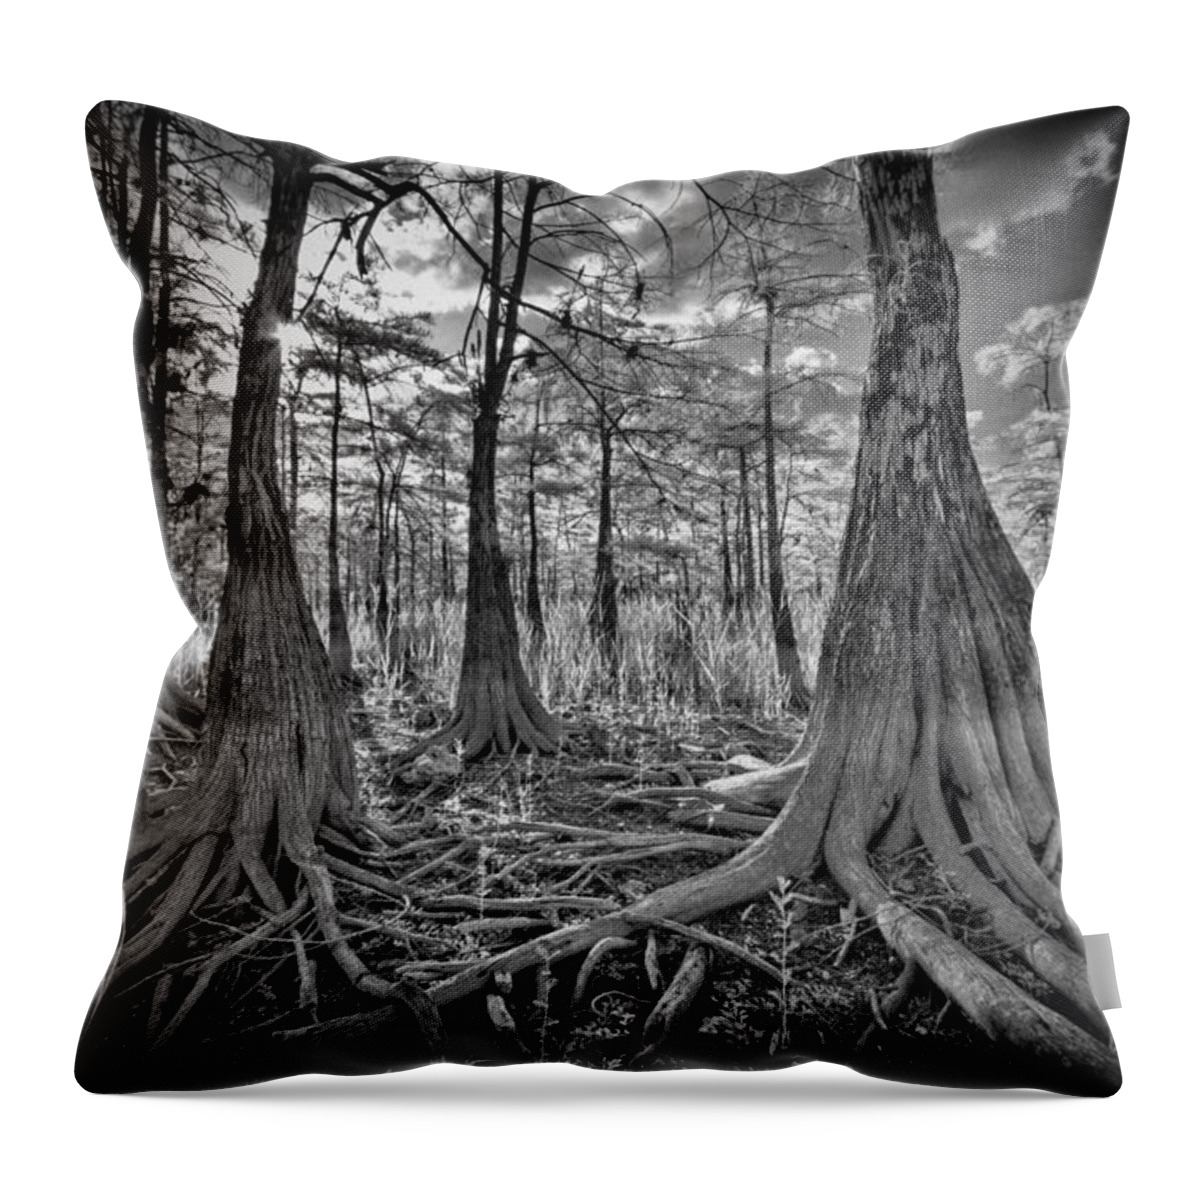 Big Throw Pillow featuring the photograph Big Cypress Tree Roots by Bradley R Youngberg